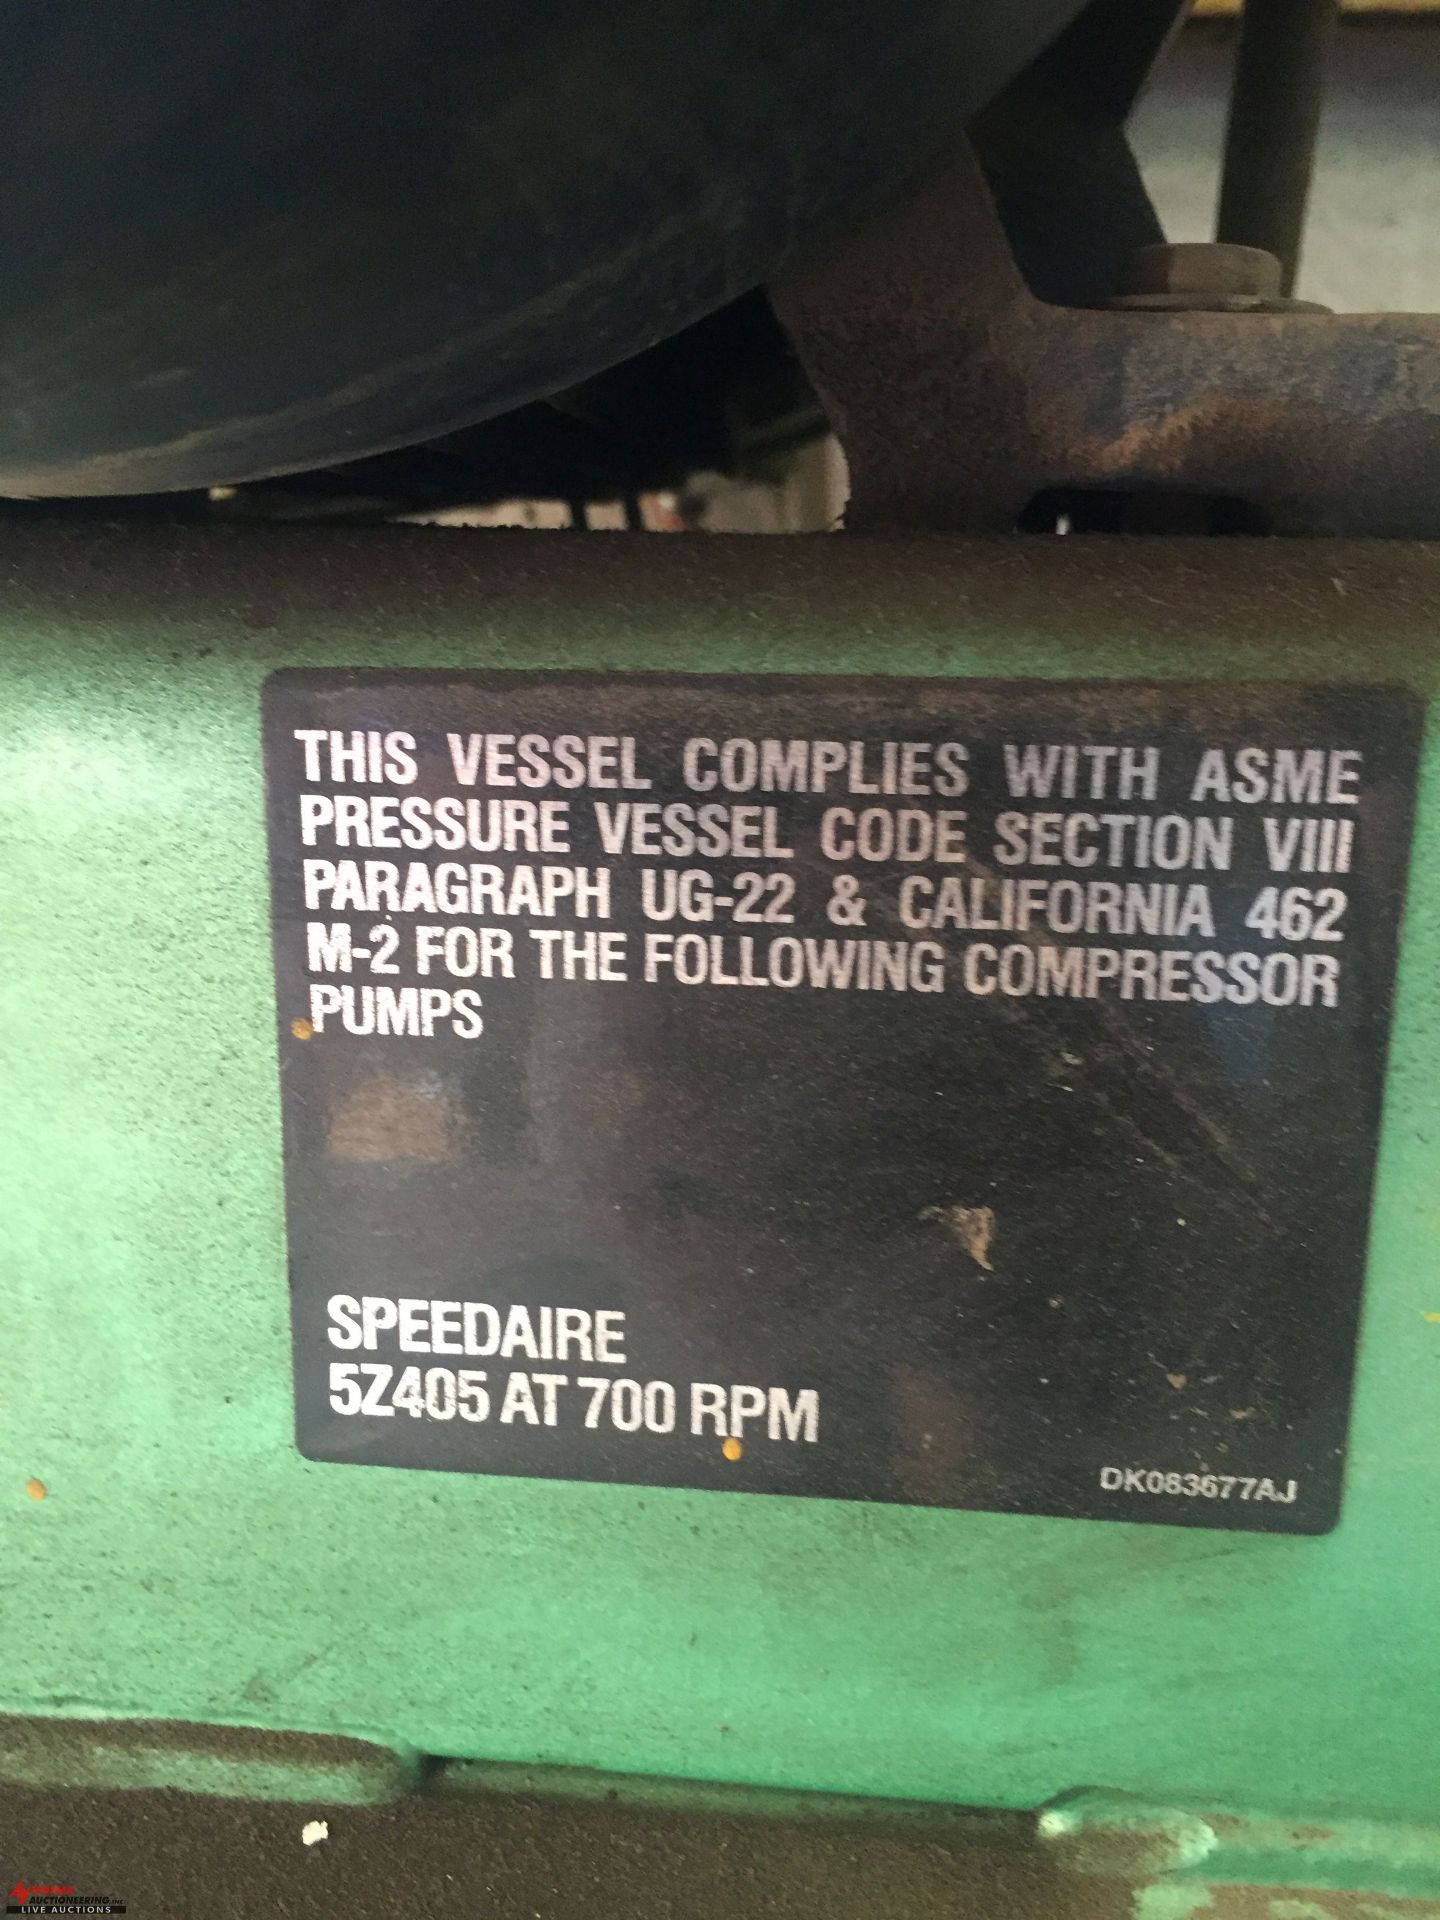 SPEEDAIRE AIR COMPRESSOR, 3 PHASE [LOCATION: EAST WINANS STREET LOCATION] - Image 4 of 4